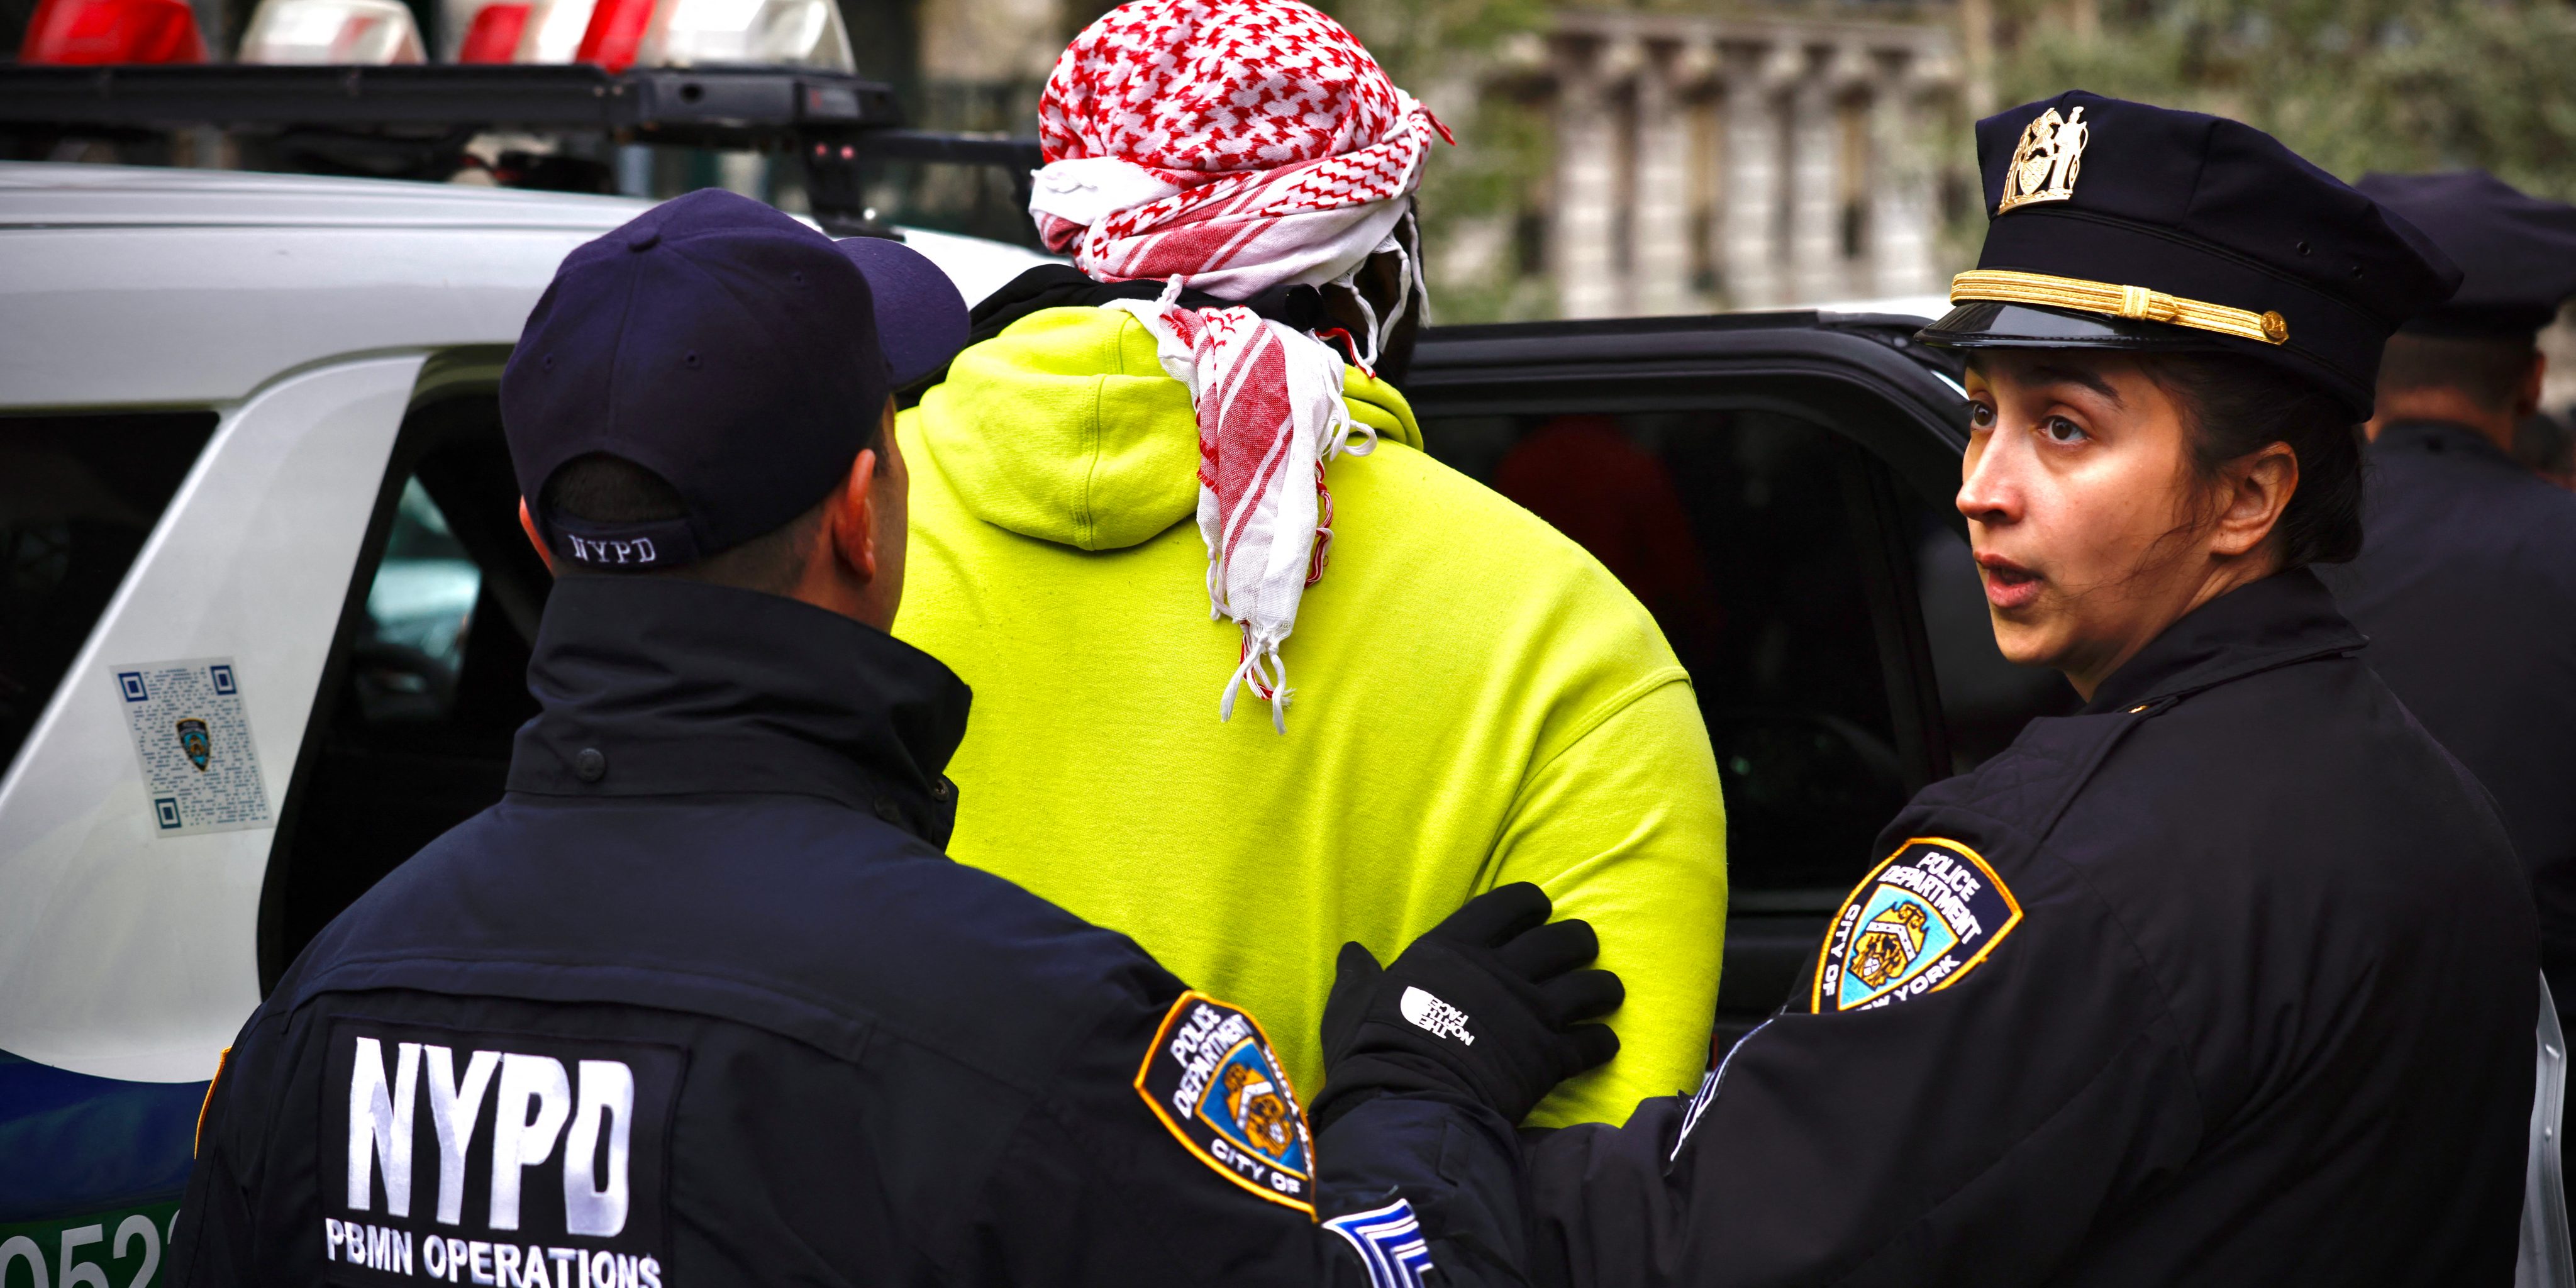 NYPD officers detain a person as pro-Palestinian protesters gather outside of Columbia University in New York City on April 18, 2024. Officers cleared out a pro-Palestinian campus demonstration on April 18, a day after university officials testified about anti-Semitism before Congress. Leaders of Columbia University defended the prestigious New York school's efforts to combat anti-Semitism on campus at a fiery congressional hearing on April 17. (Photo by Kena Betancur / AFP) (Photo by KENA BETANCUR/AFP via Getty Images)